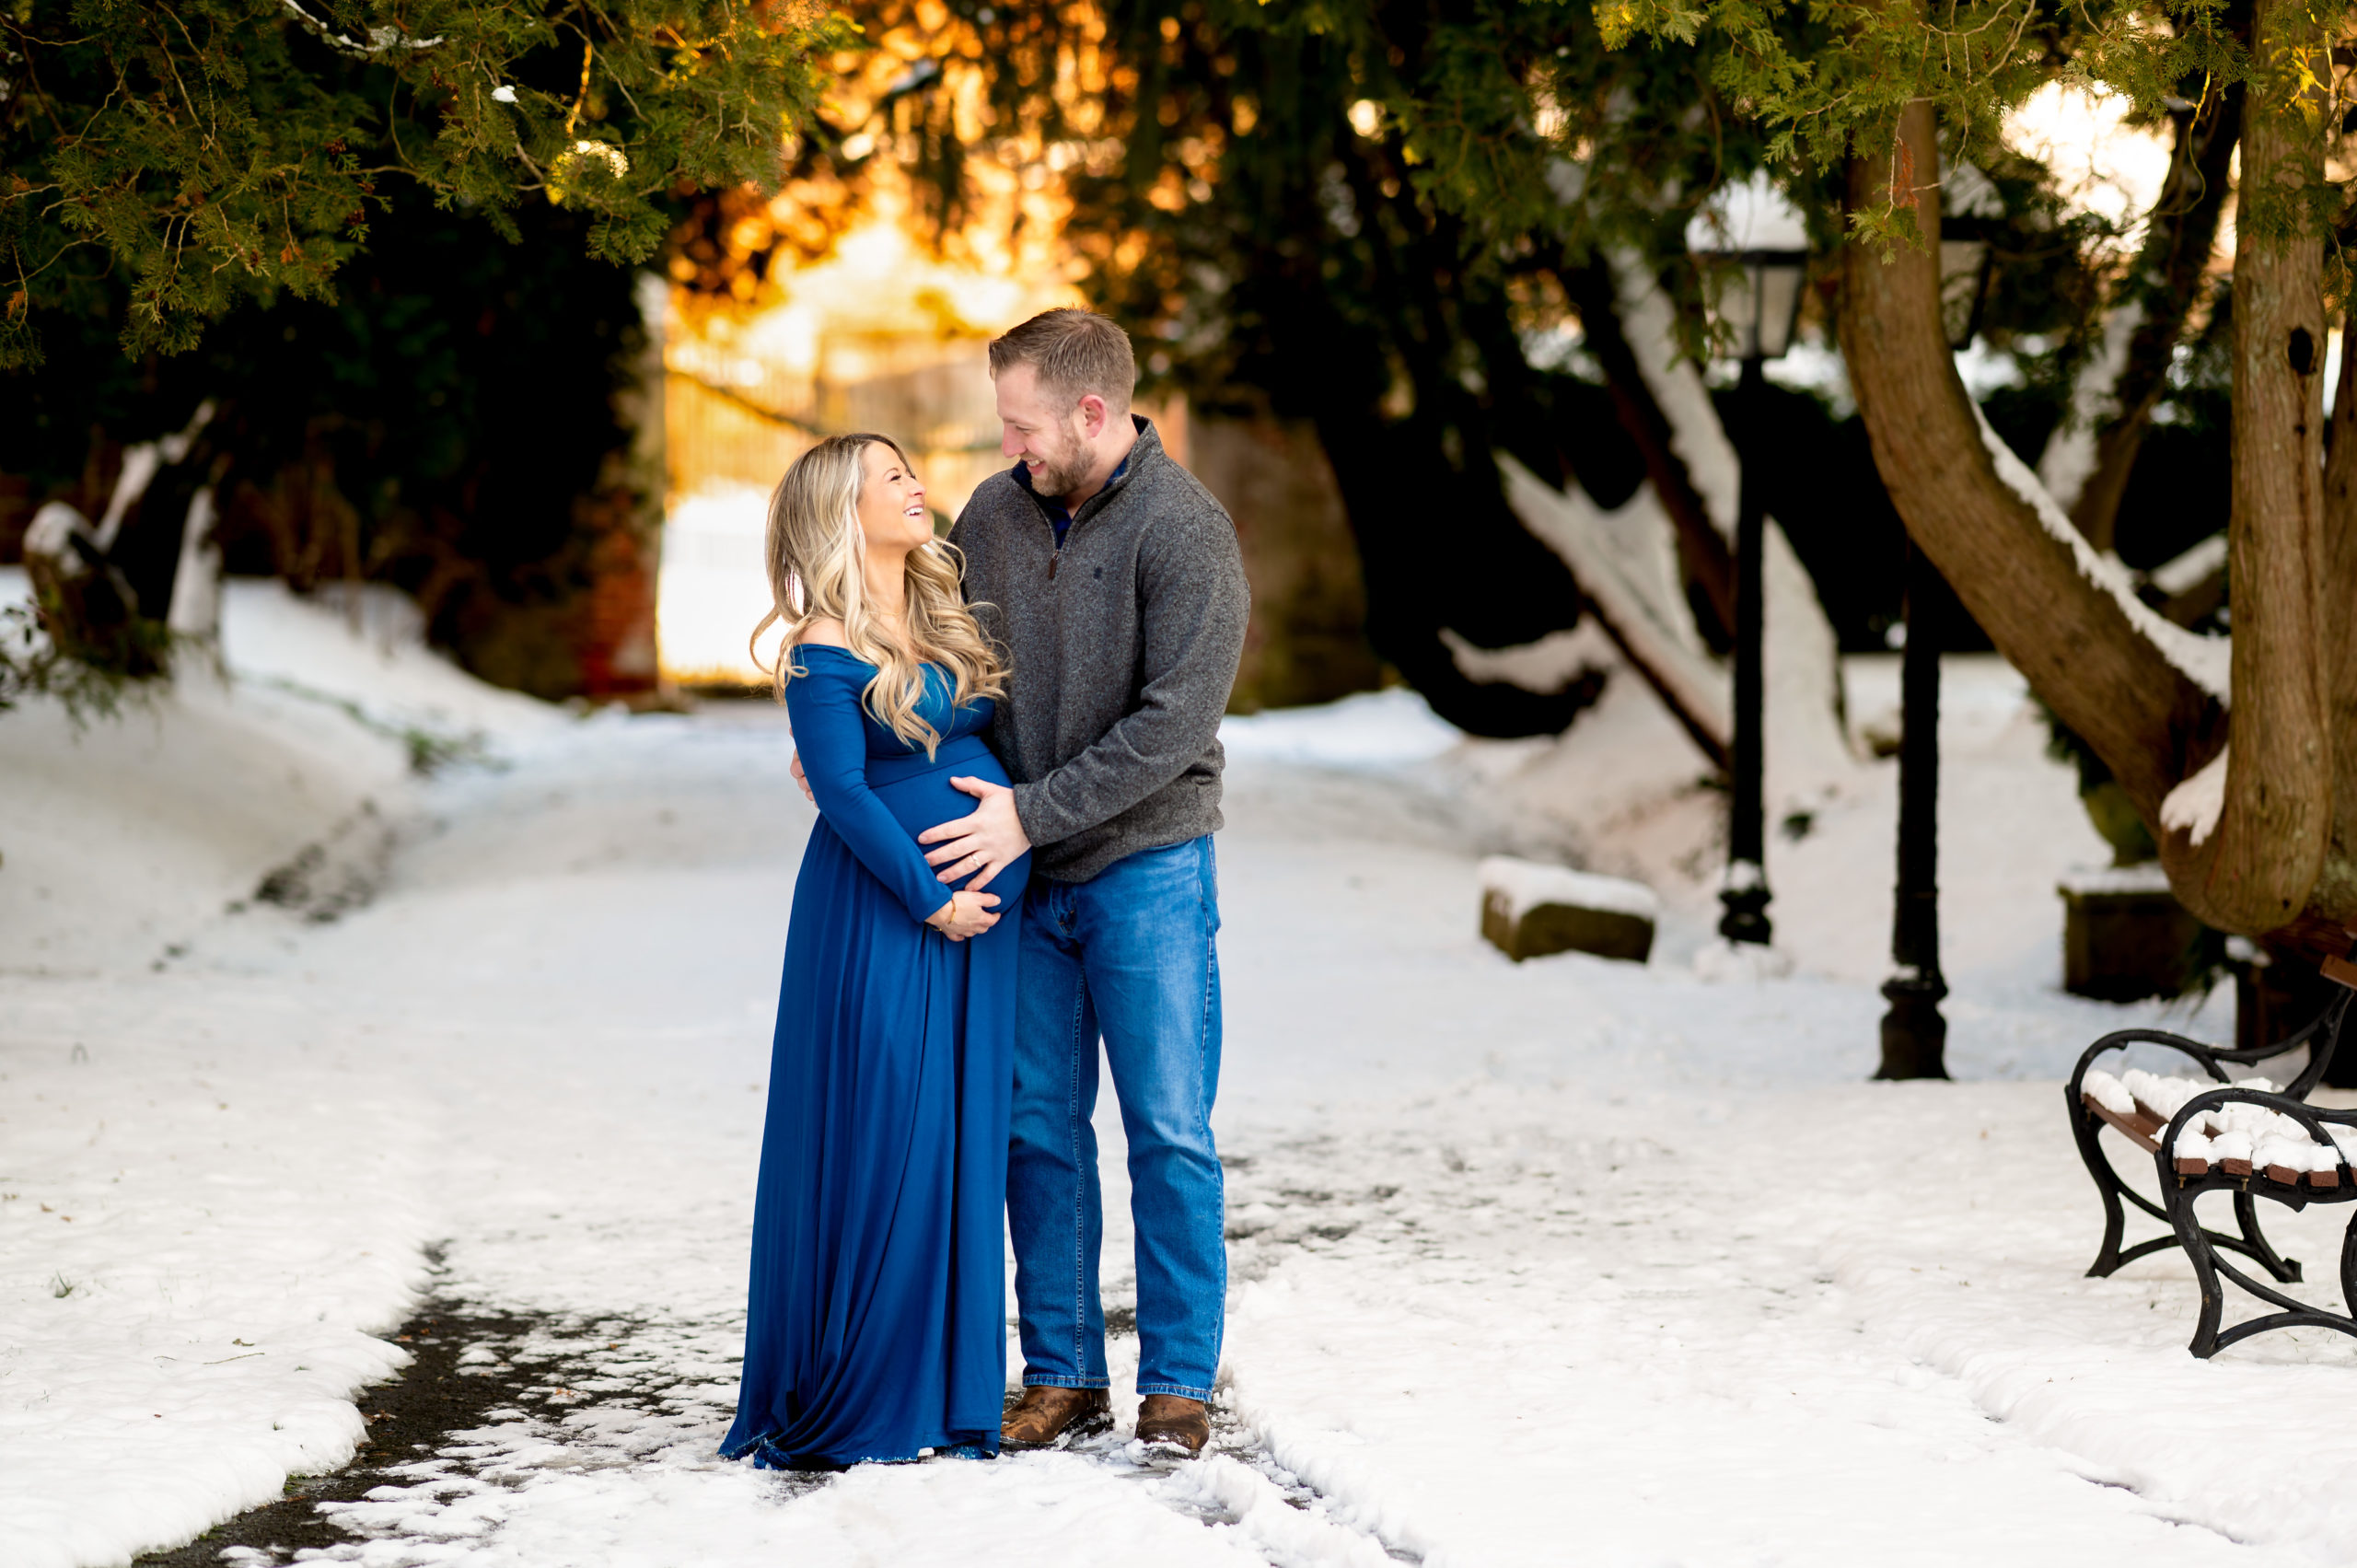 South Jersey maternity photo in the snow